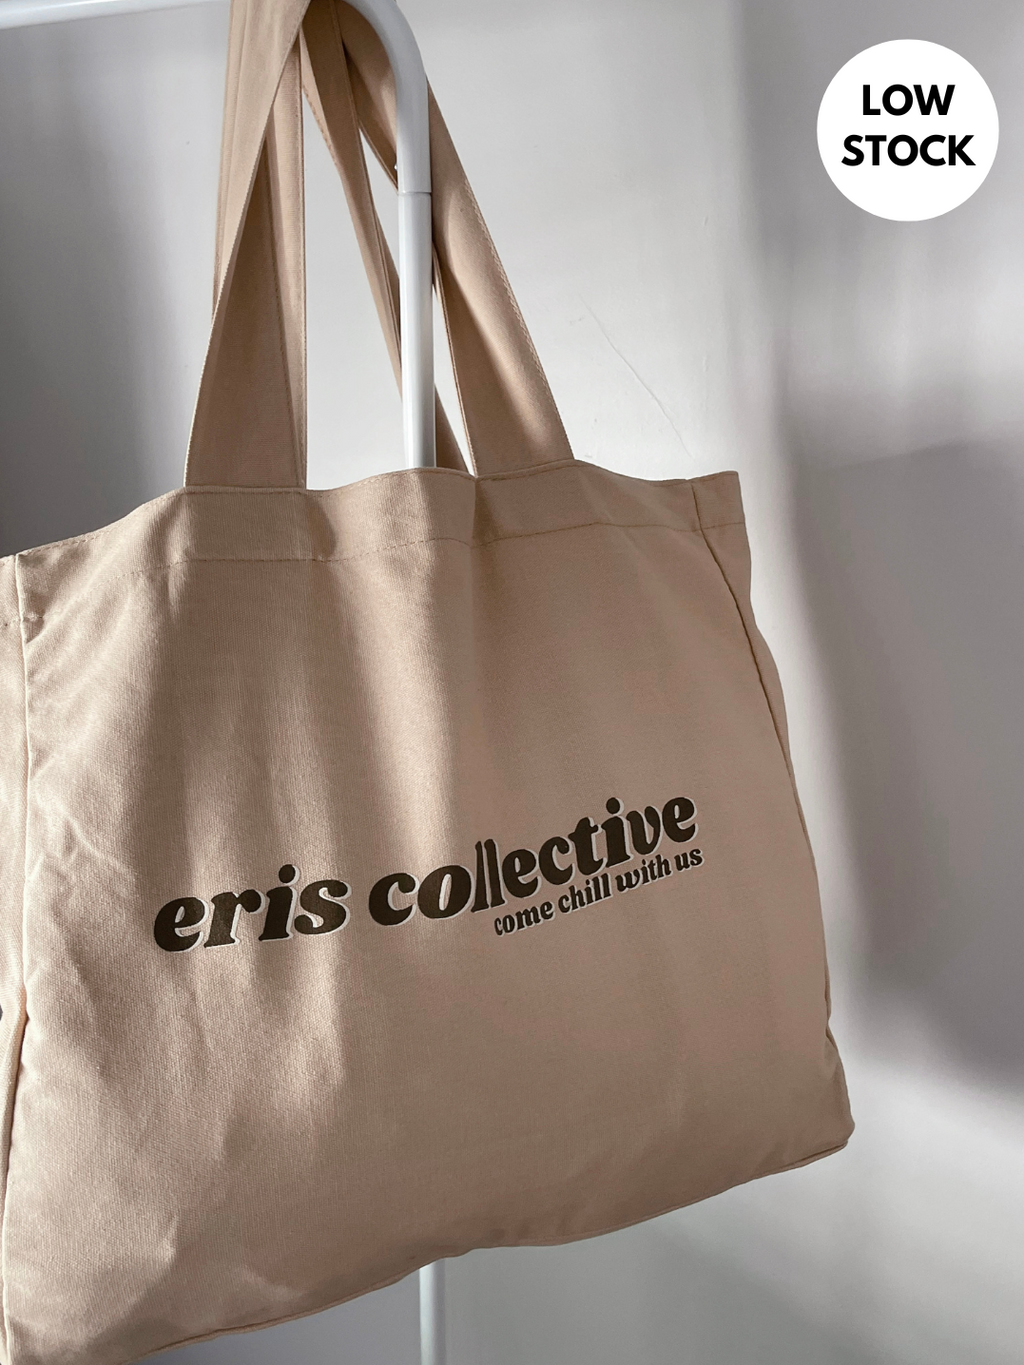 Eris Collective ECO TOTE - come chill with us